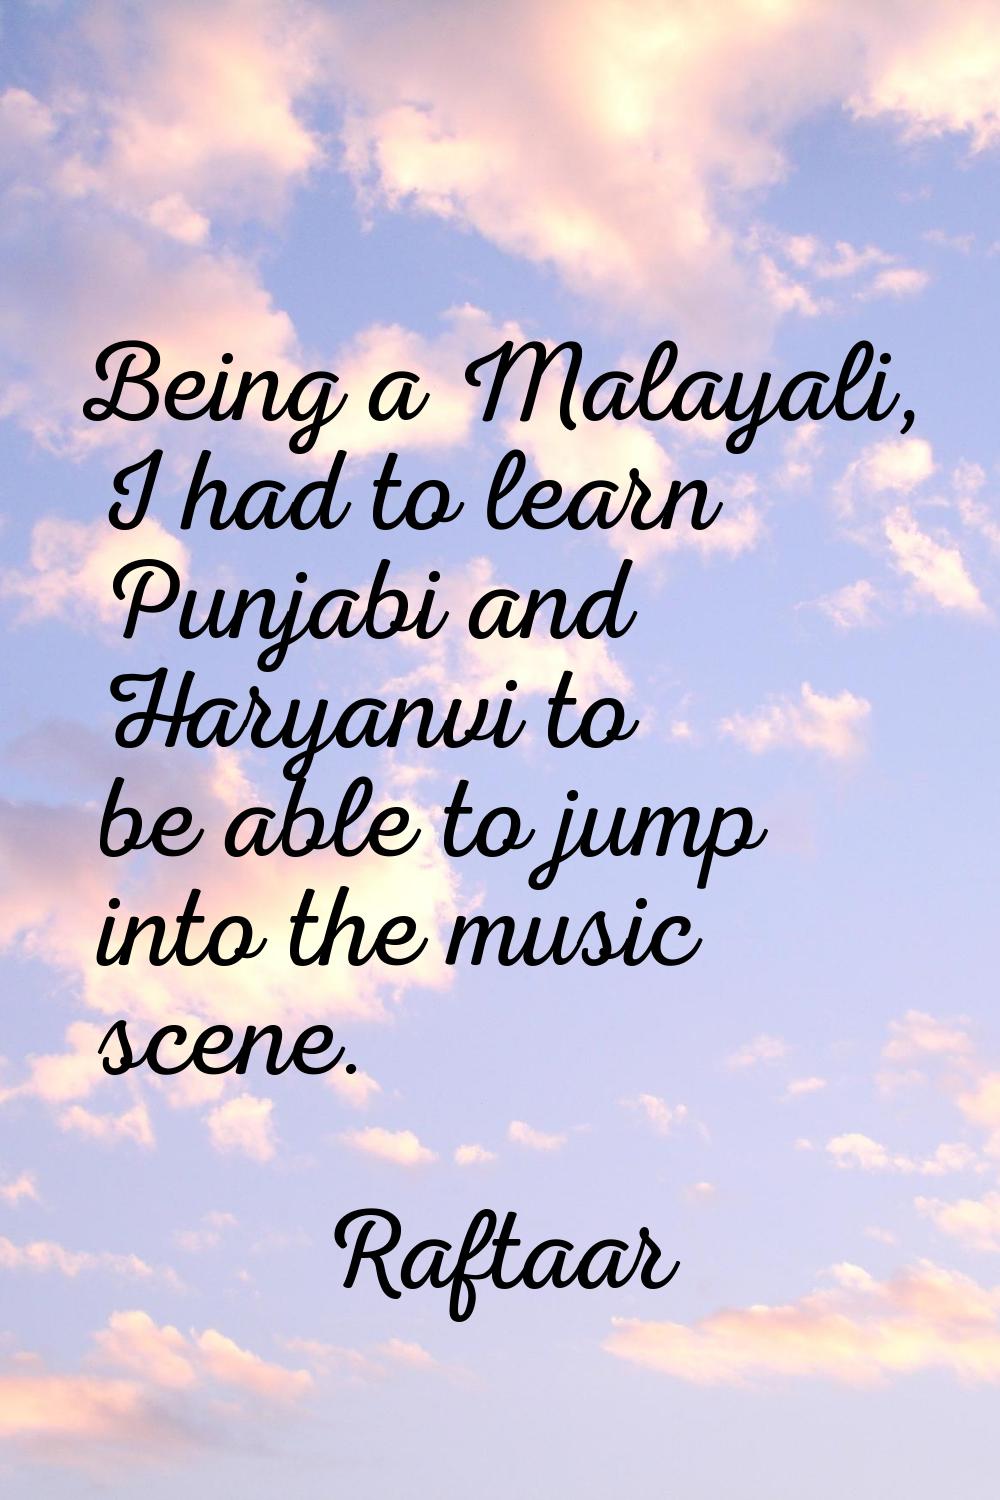 Being a Malayali, I had to learn Punjabi and Haryanvi to be able to jump into the music scene.